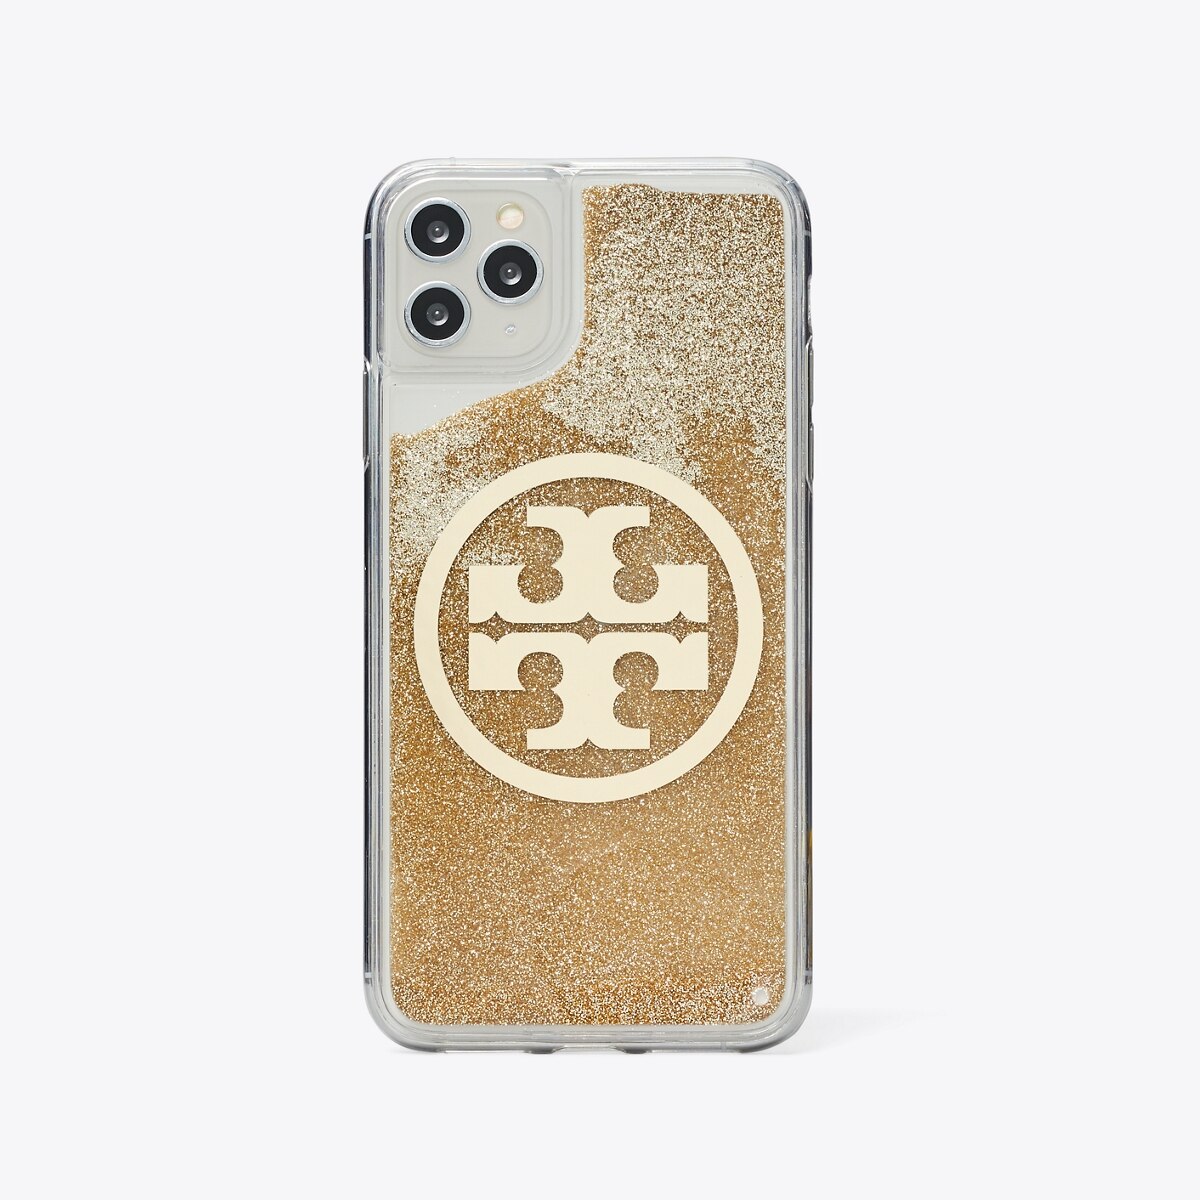 Perry Bombé Glitter Phone Case for iPhone 11 Pro Max: Women's Accessories |  Tech Accessories | Tory Burch UK